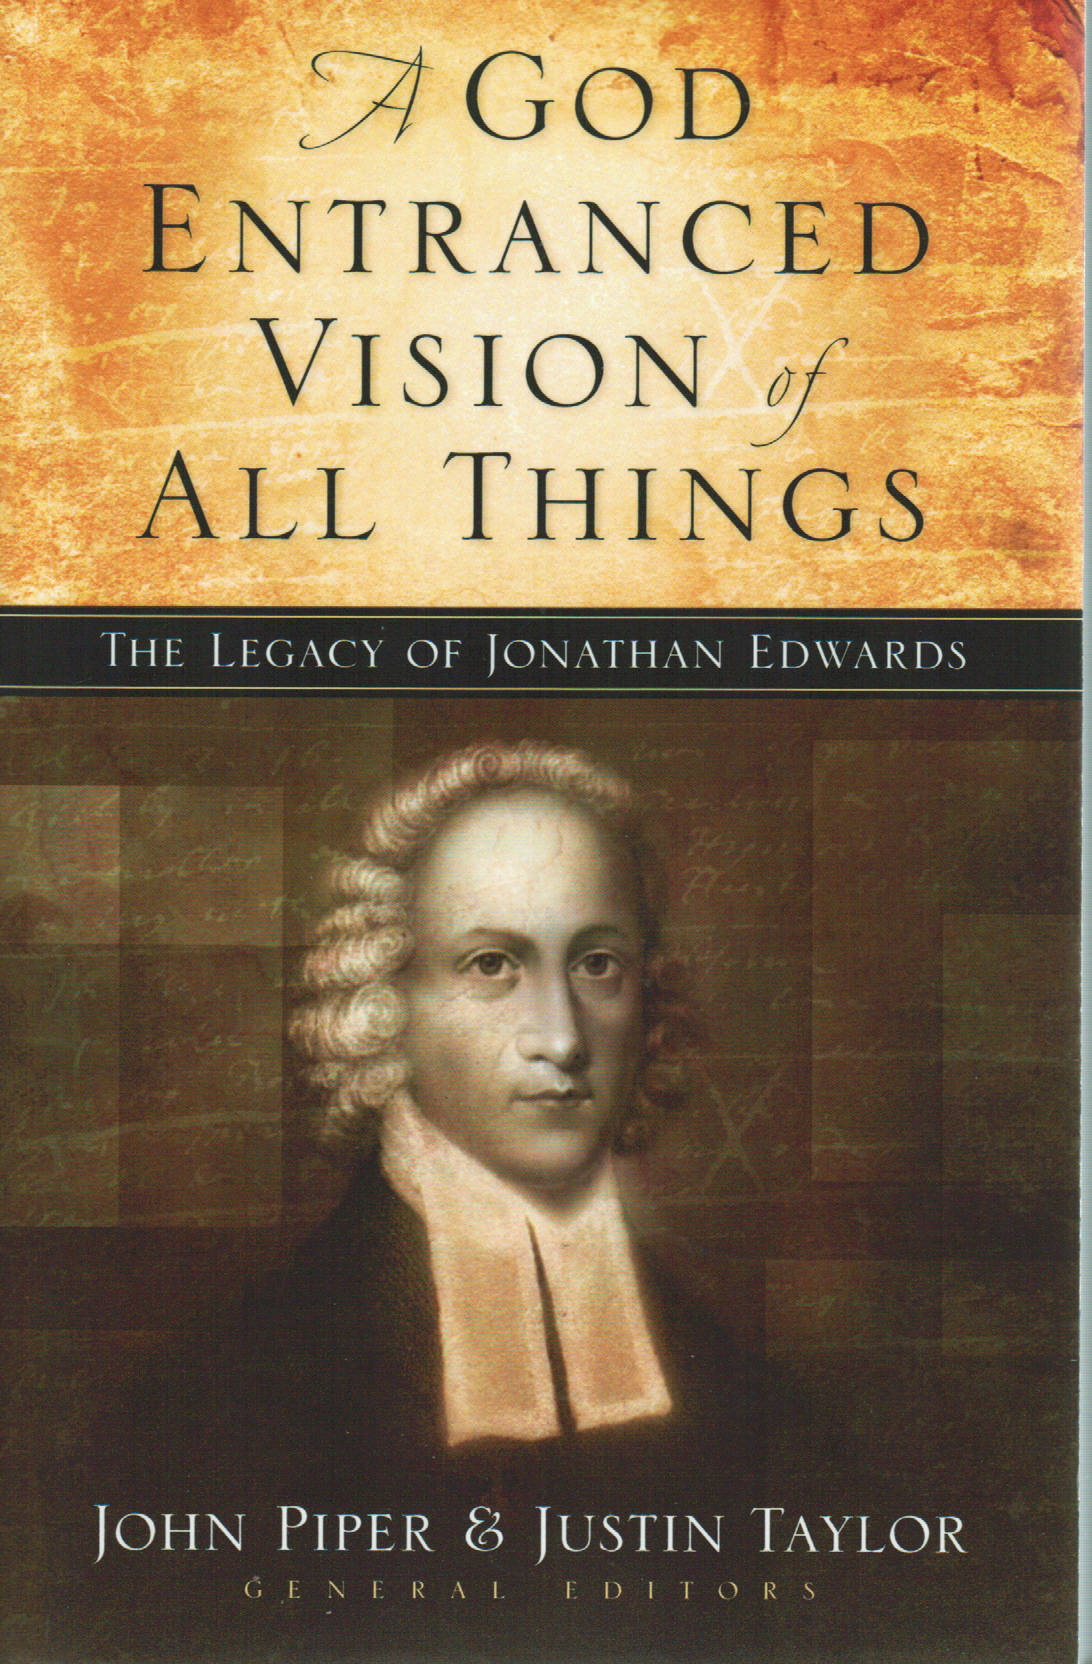 A God Entranced Vision of All Things: The Legacy of Jonathan Edwards